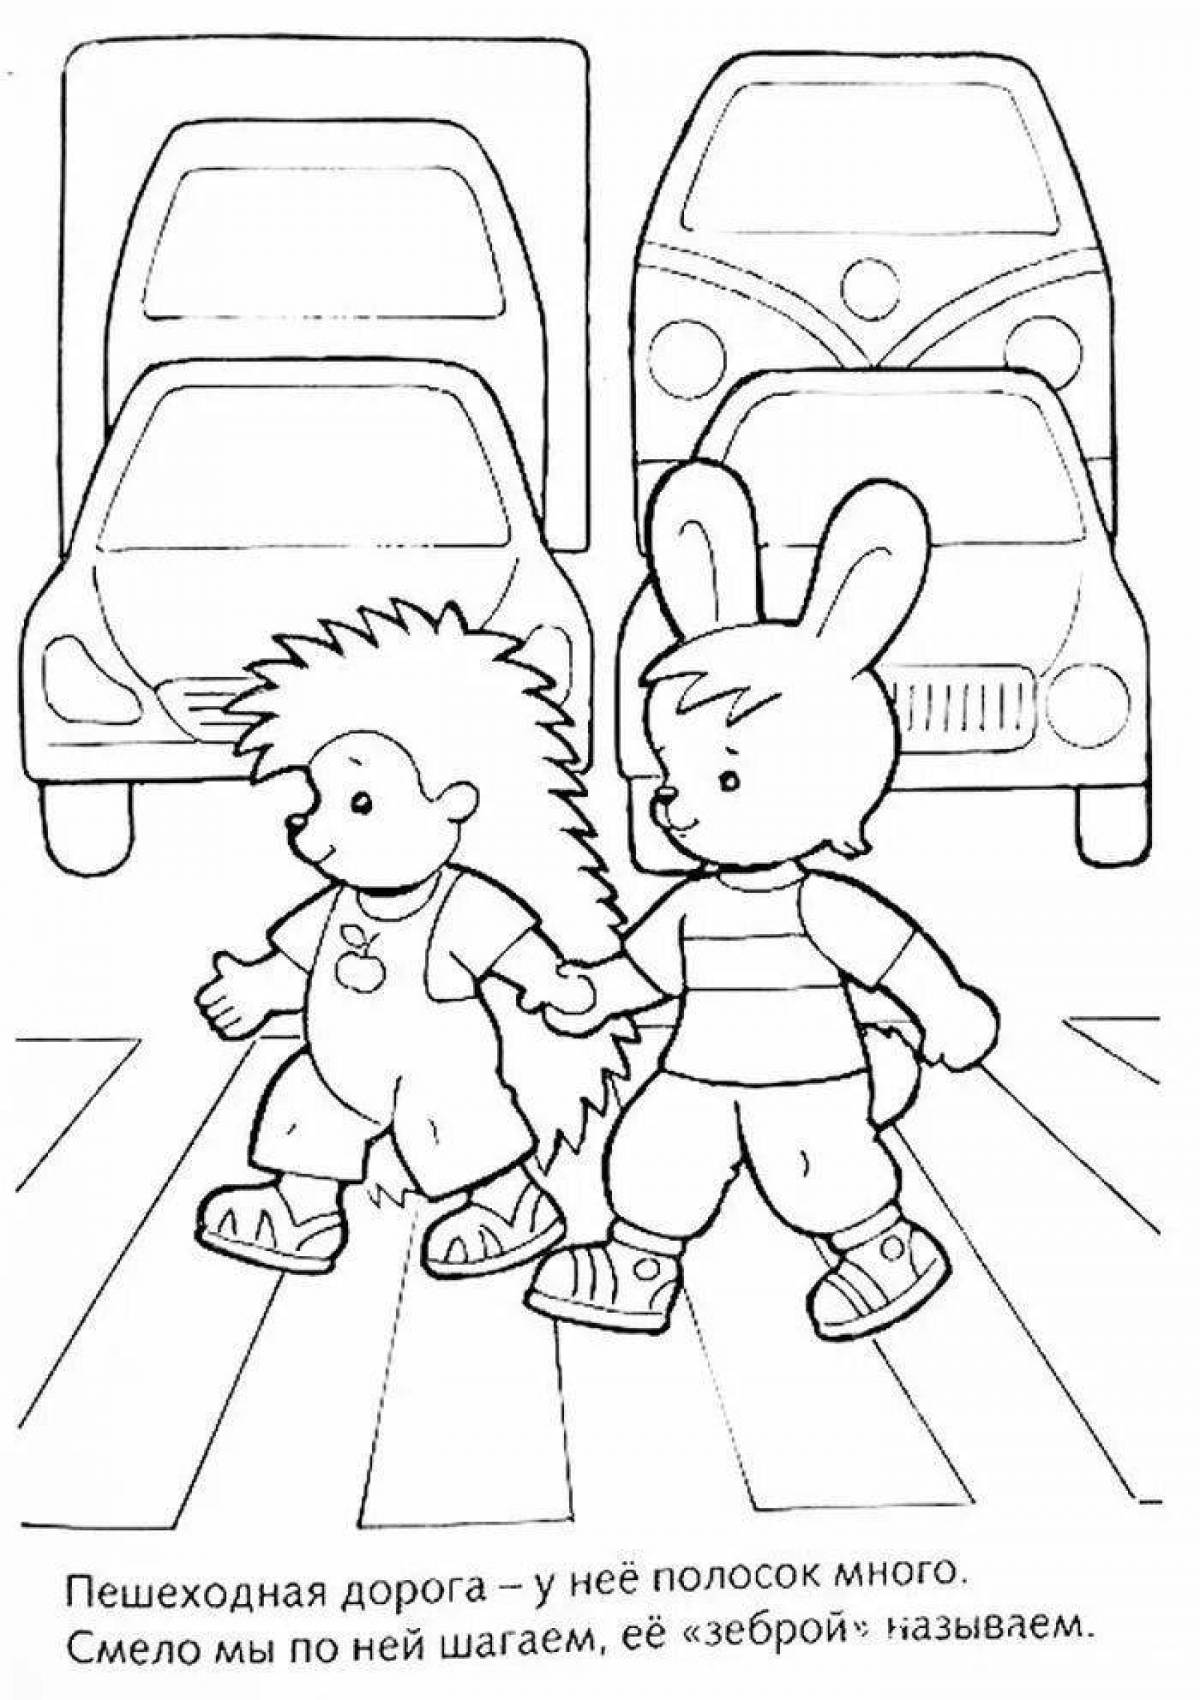 Bright road safety coloring page